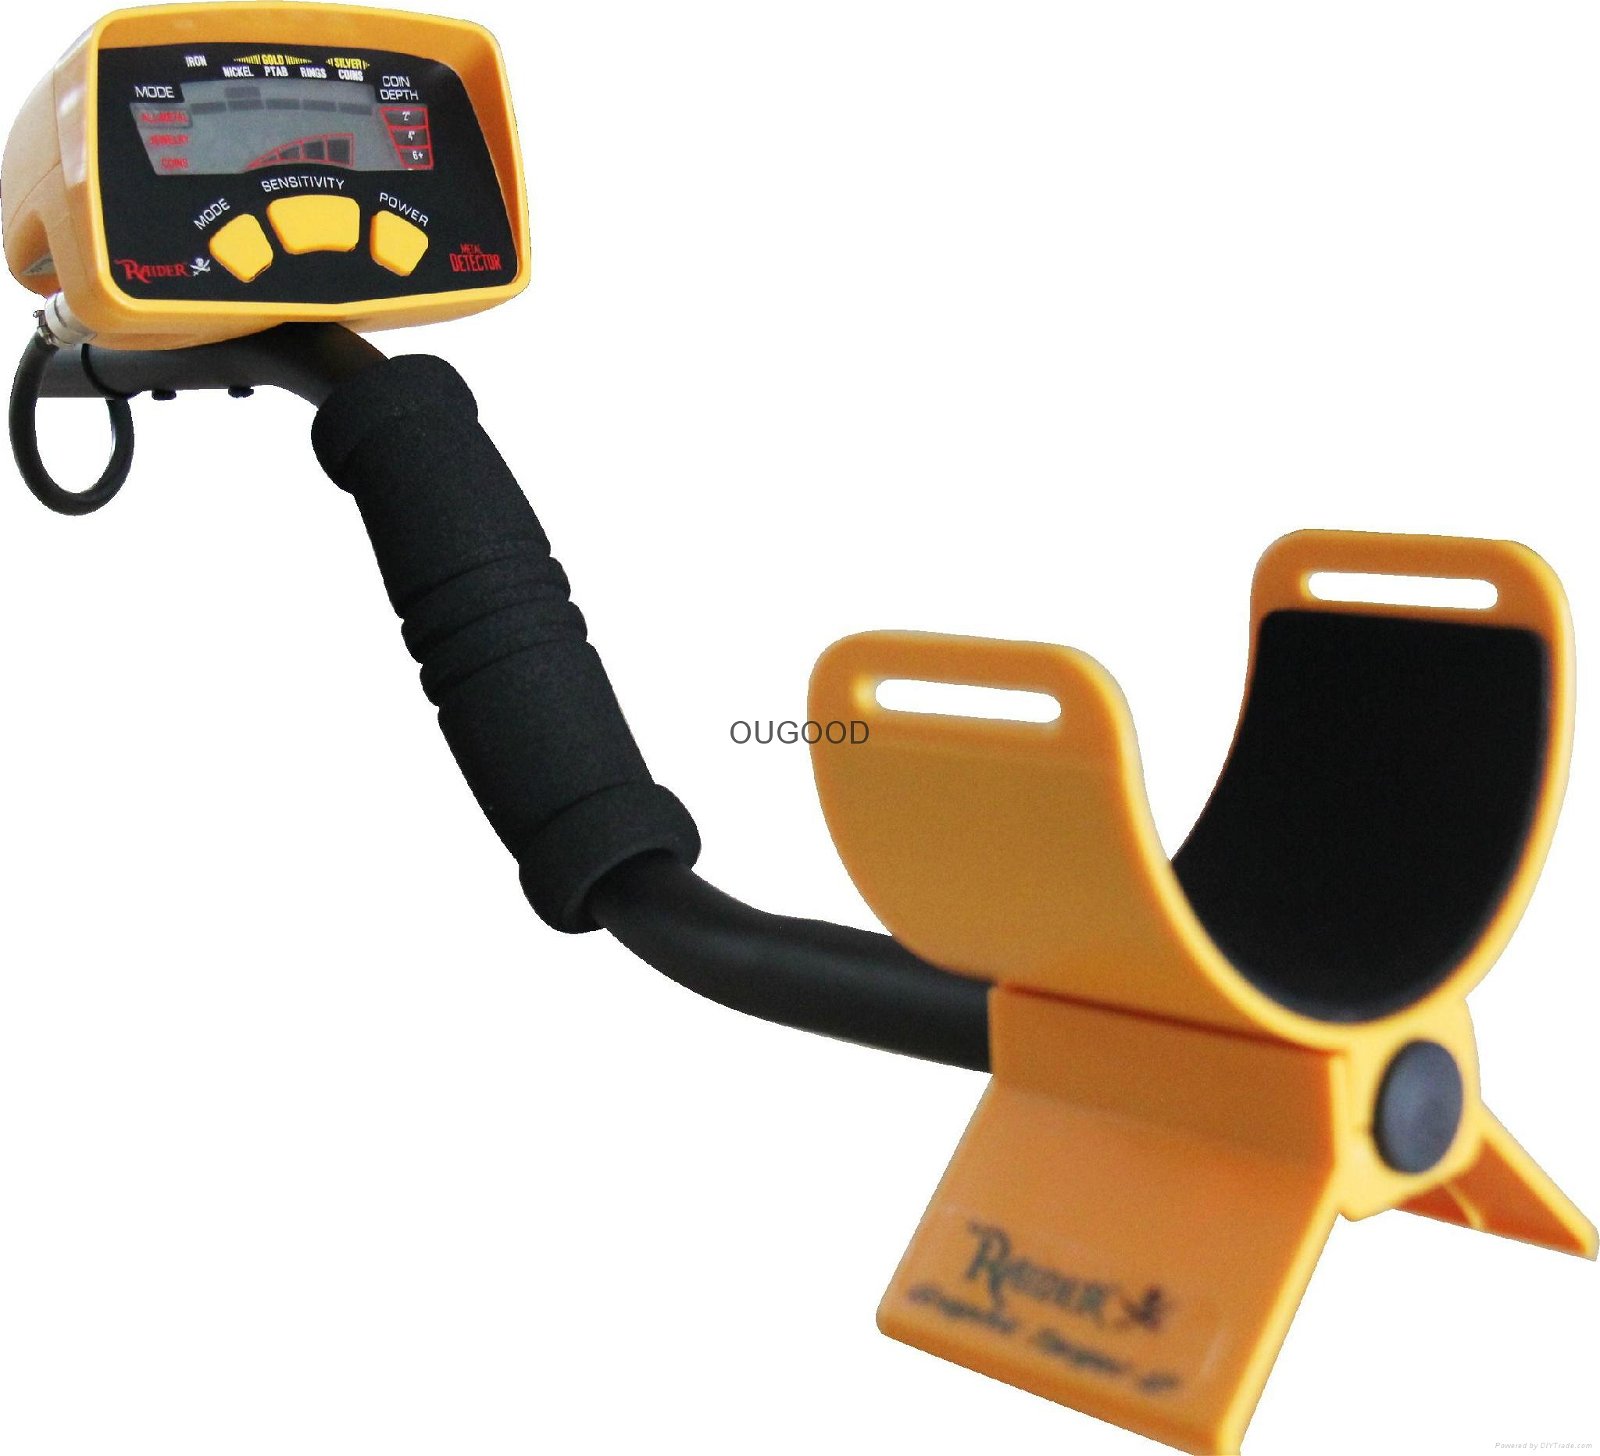 Large LCD display underground metal detector with All Metal Jewely & Coins model 2